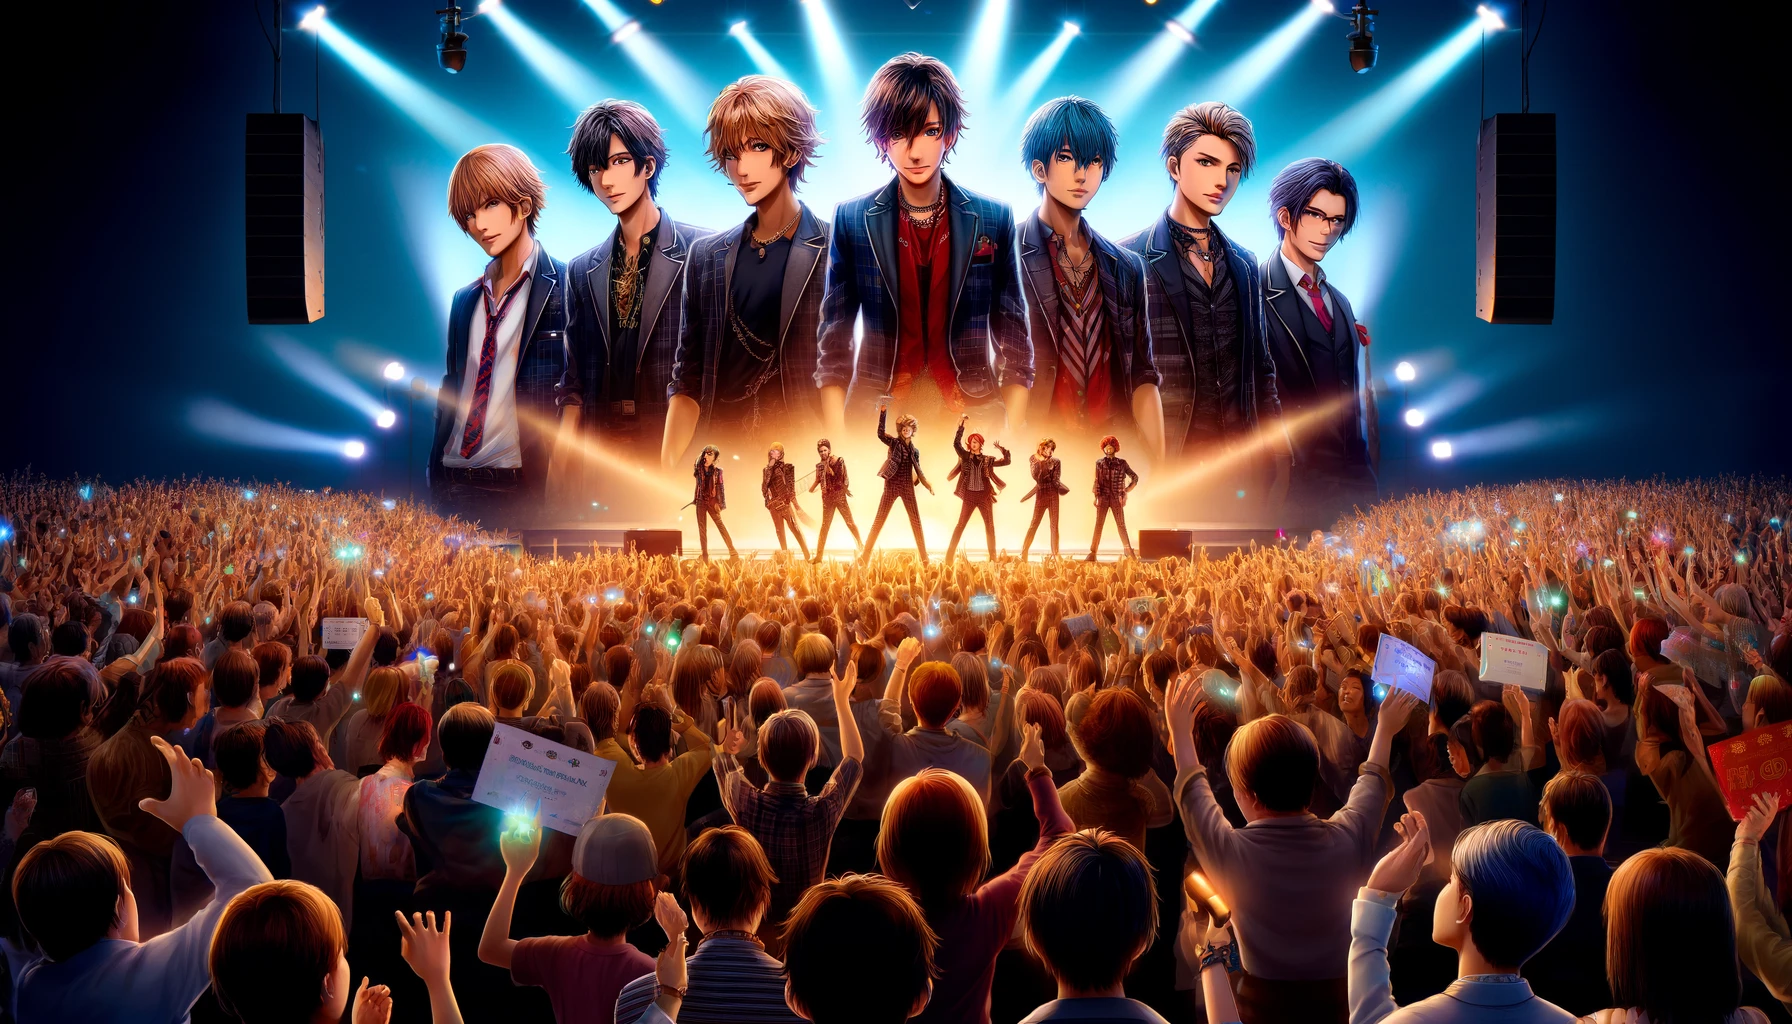 An image of a Japanese male idol group experiencing a sudden rise in popularity, depicted by a vibrant concert scene. The group of six young men, each with unique hairstyles and outfits, performs energetically on a grand stage. The crowd is enormous, with fans holding up signs and light sticks. The stage is adorned with extravagant lighting and large screens showing close-ups of the members. The second image shows the same group at a press conference, surrounded by media and flashing cameras, indicating their skyrocketing fame.